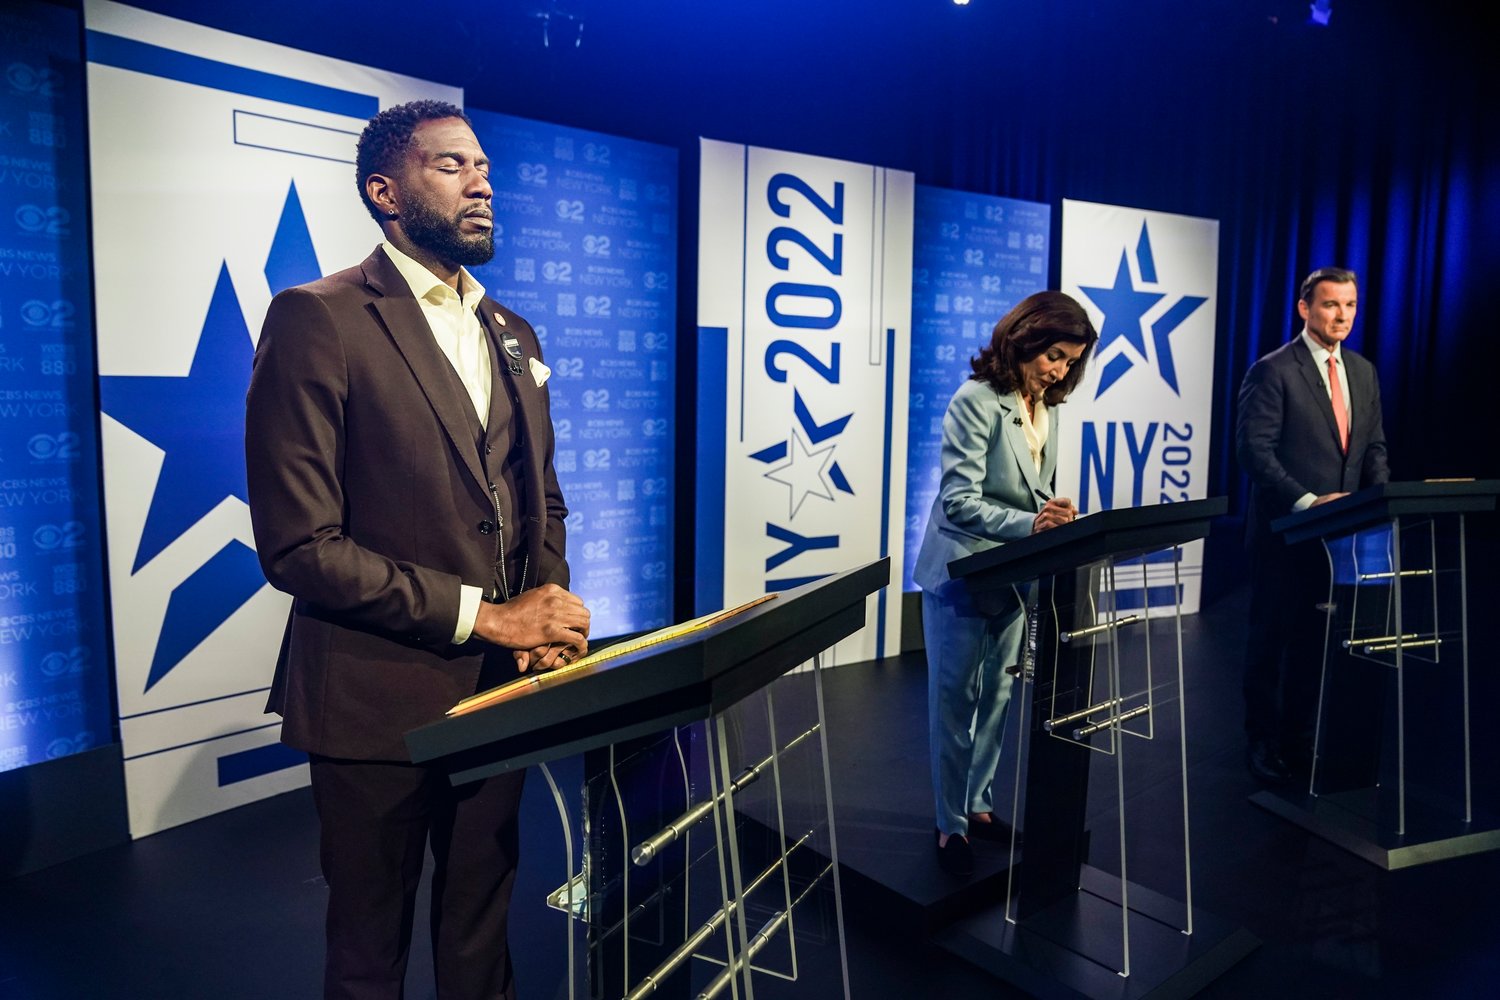 New York Public Advocate Jumaane Williams, left, New York Governor Kathy Hochul, center, Congressman Tom Suozzi, D-N.Y., prepare to face off during New York's governor primary debate at the studios of WCBS2-TV, Tuesday, June 7, 2022, in New York. (AP Photo/Bebeto Matthews)